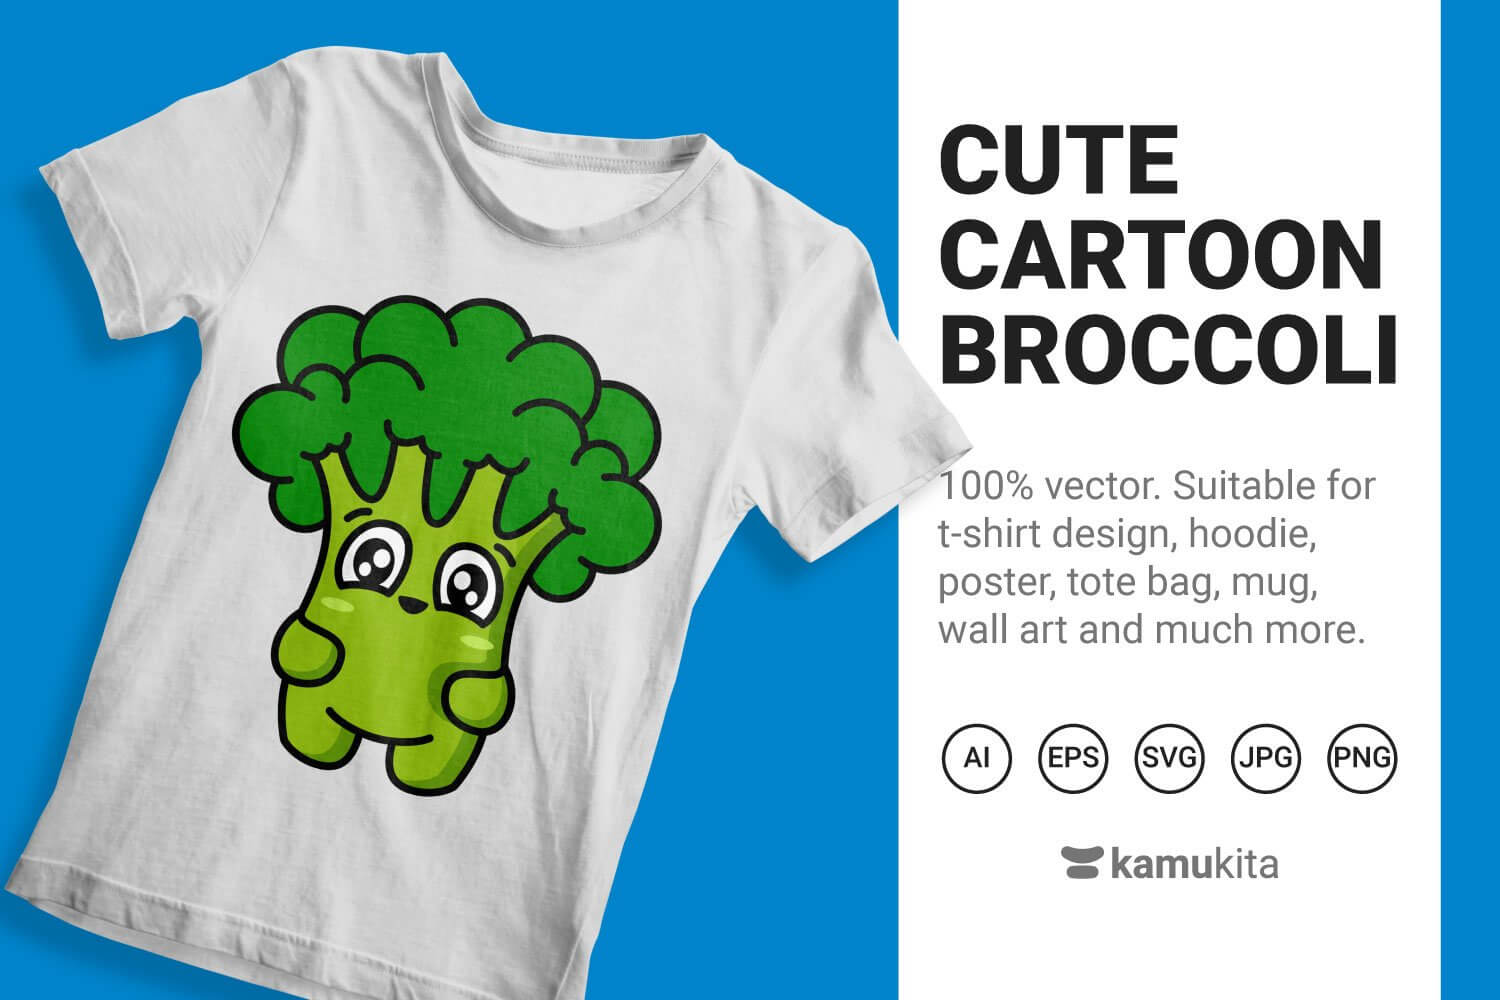 On a bright blue background is a white t-shirt with a pattern of green cute broccoli.